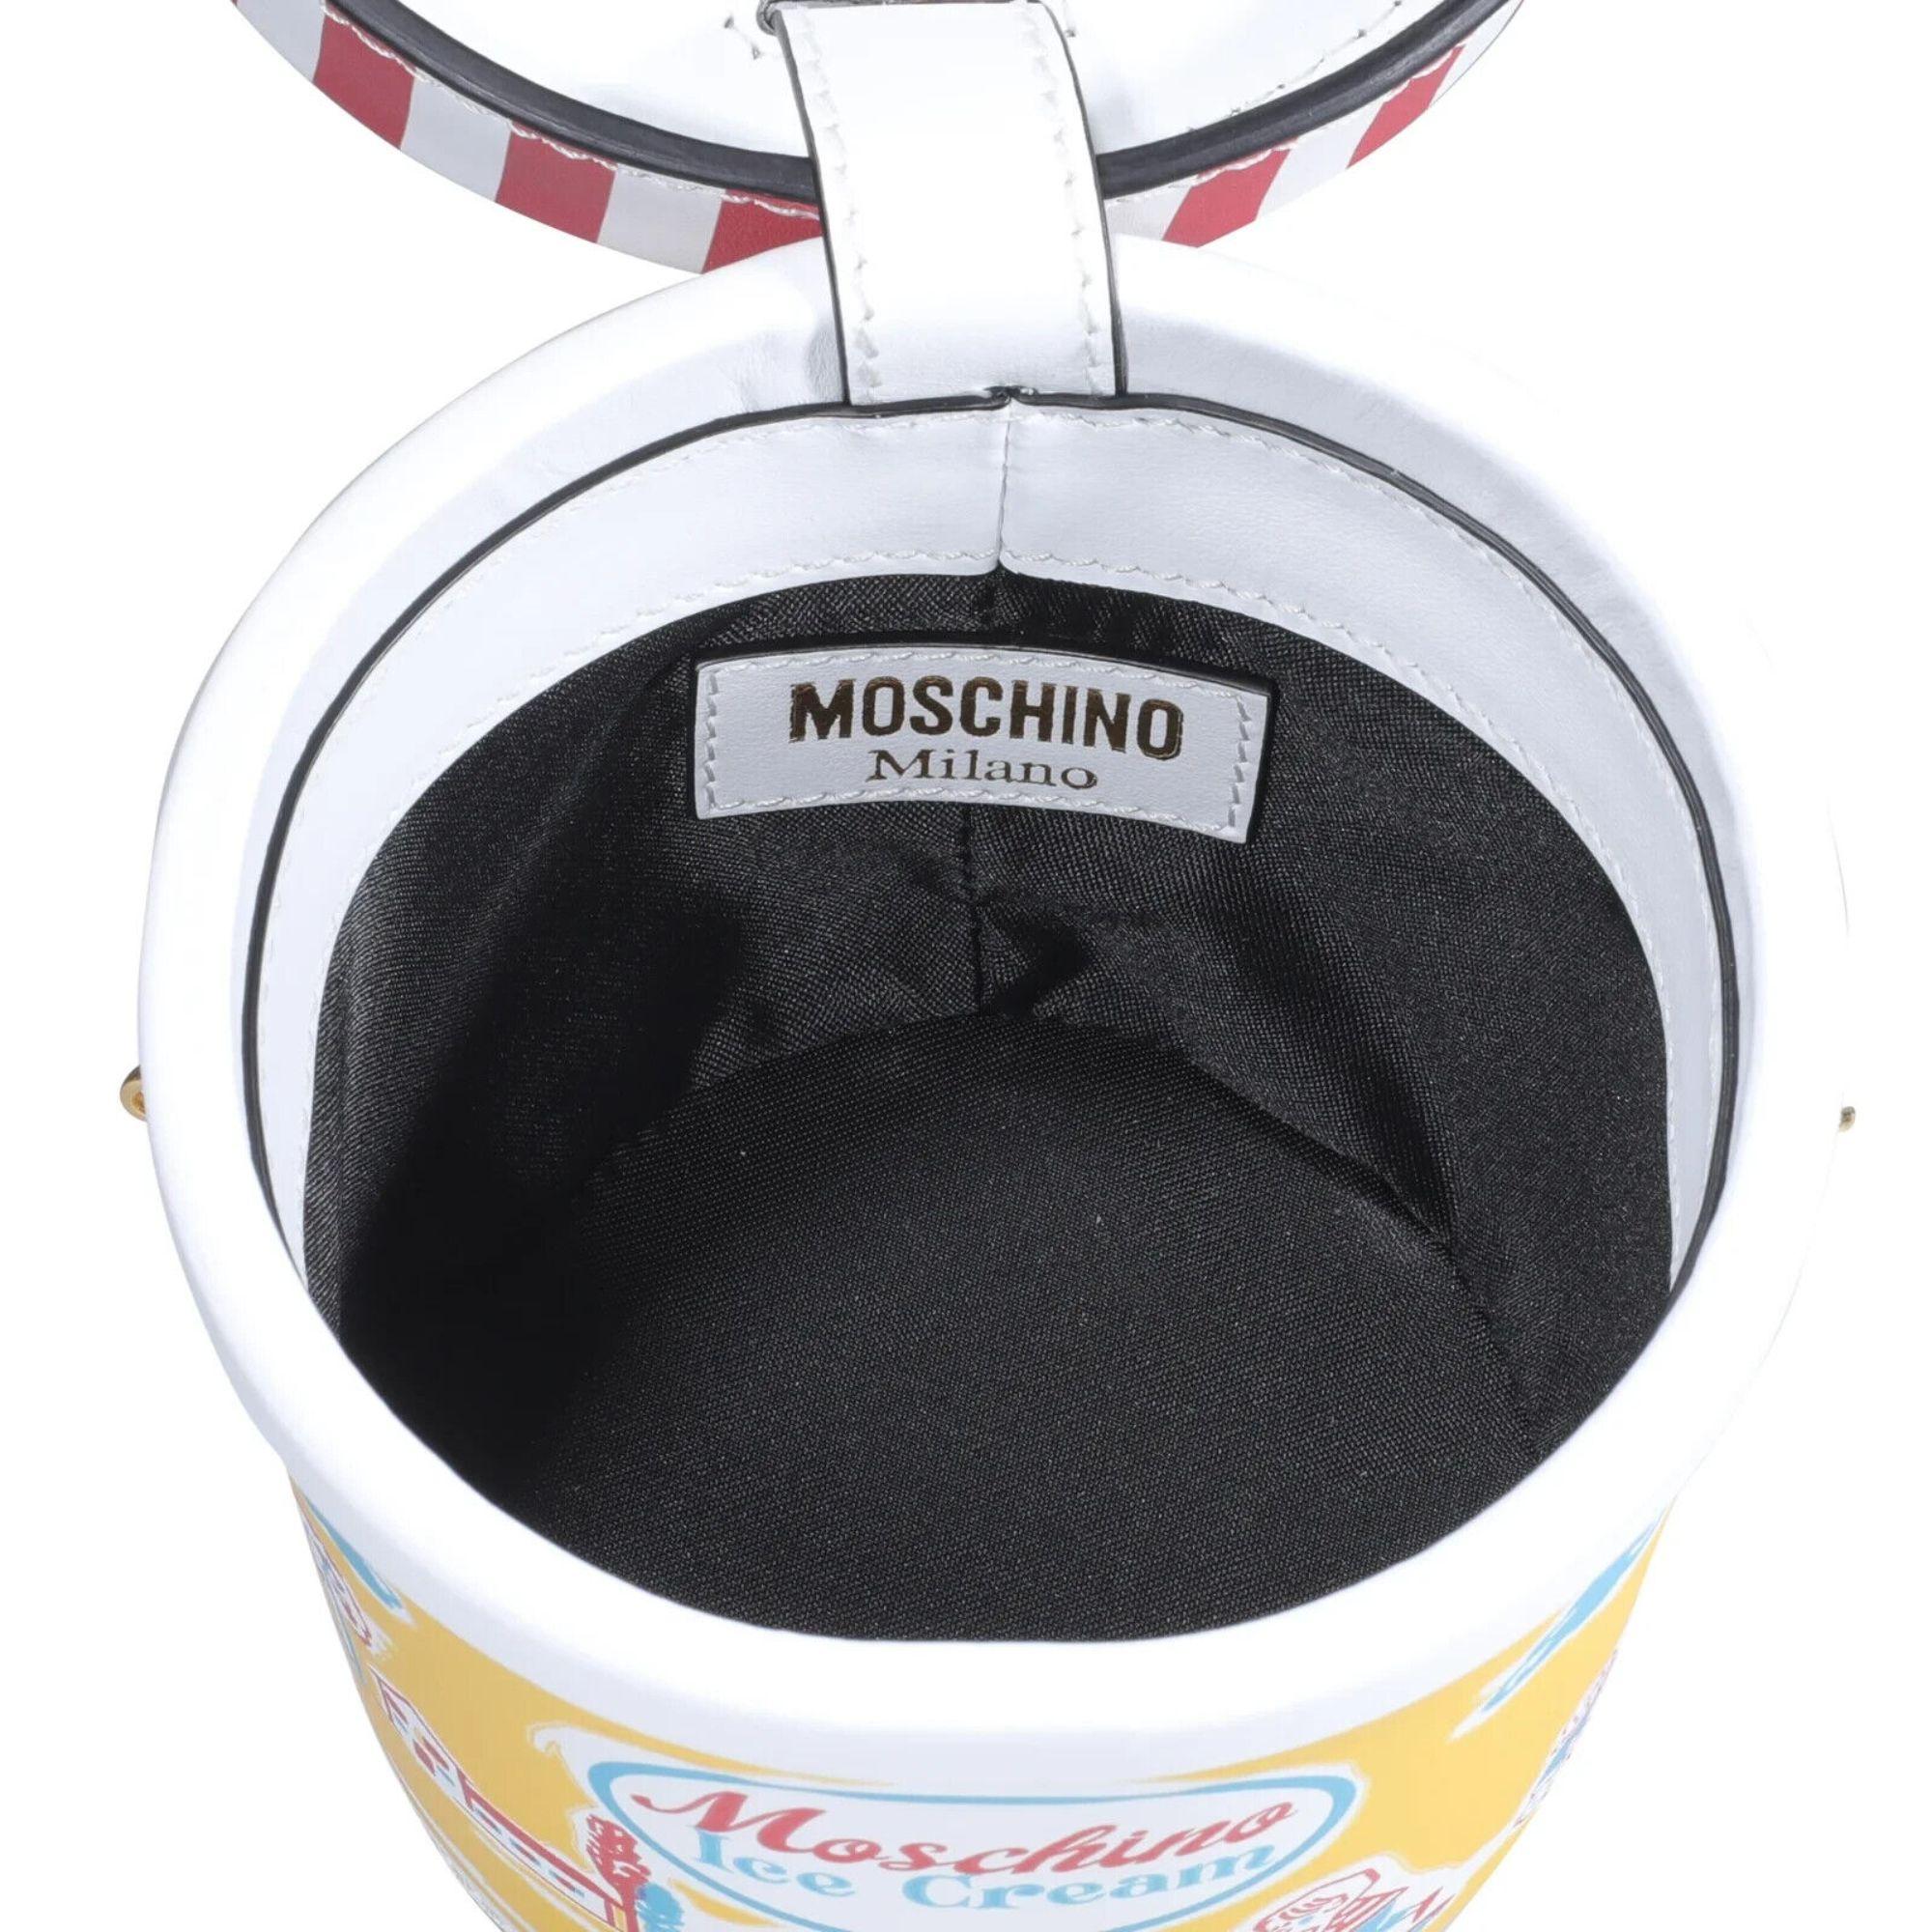 Women's SS22 Moschino Couture Banana Split Icecream Pint Leather Shoulder Bag For Sale